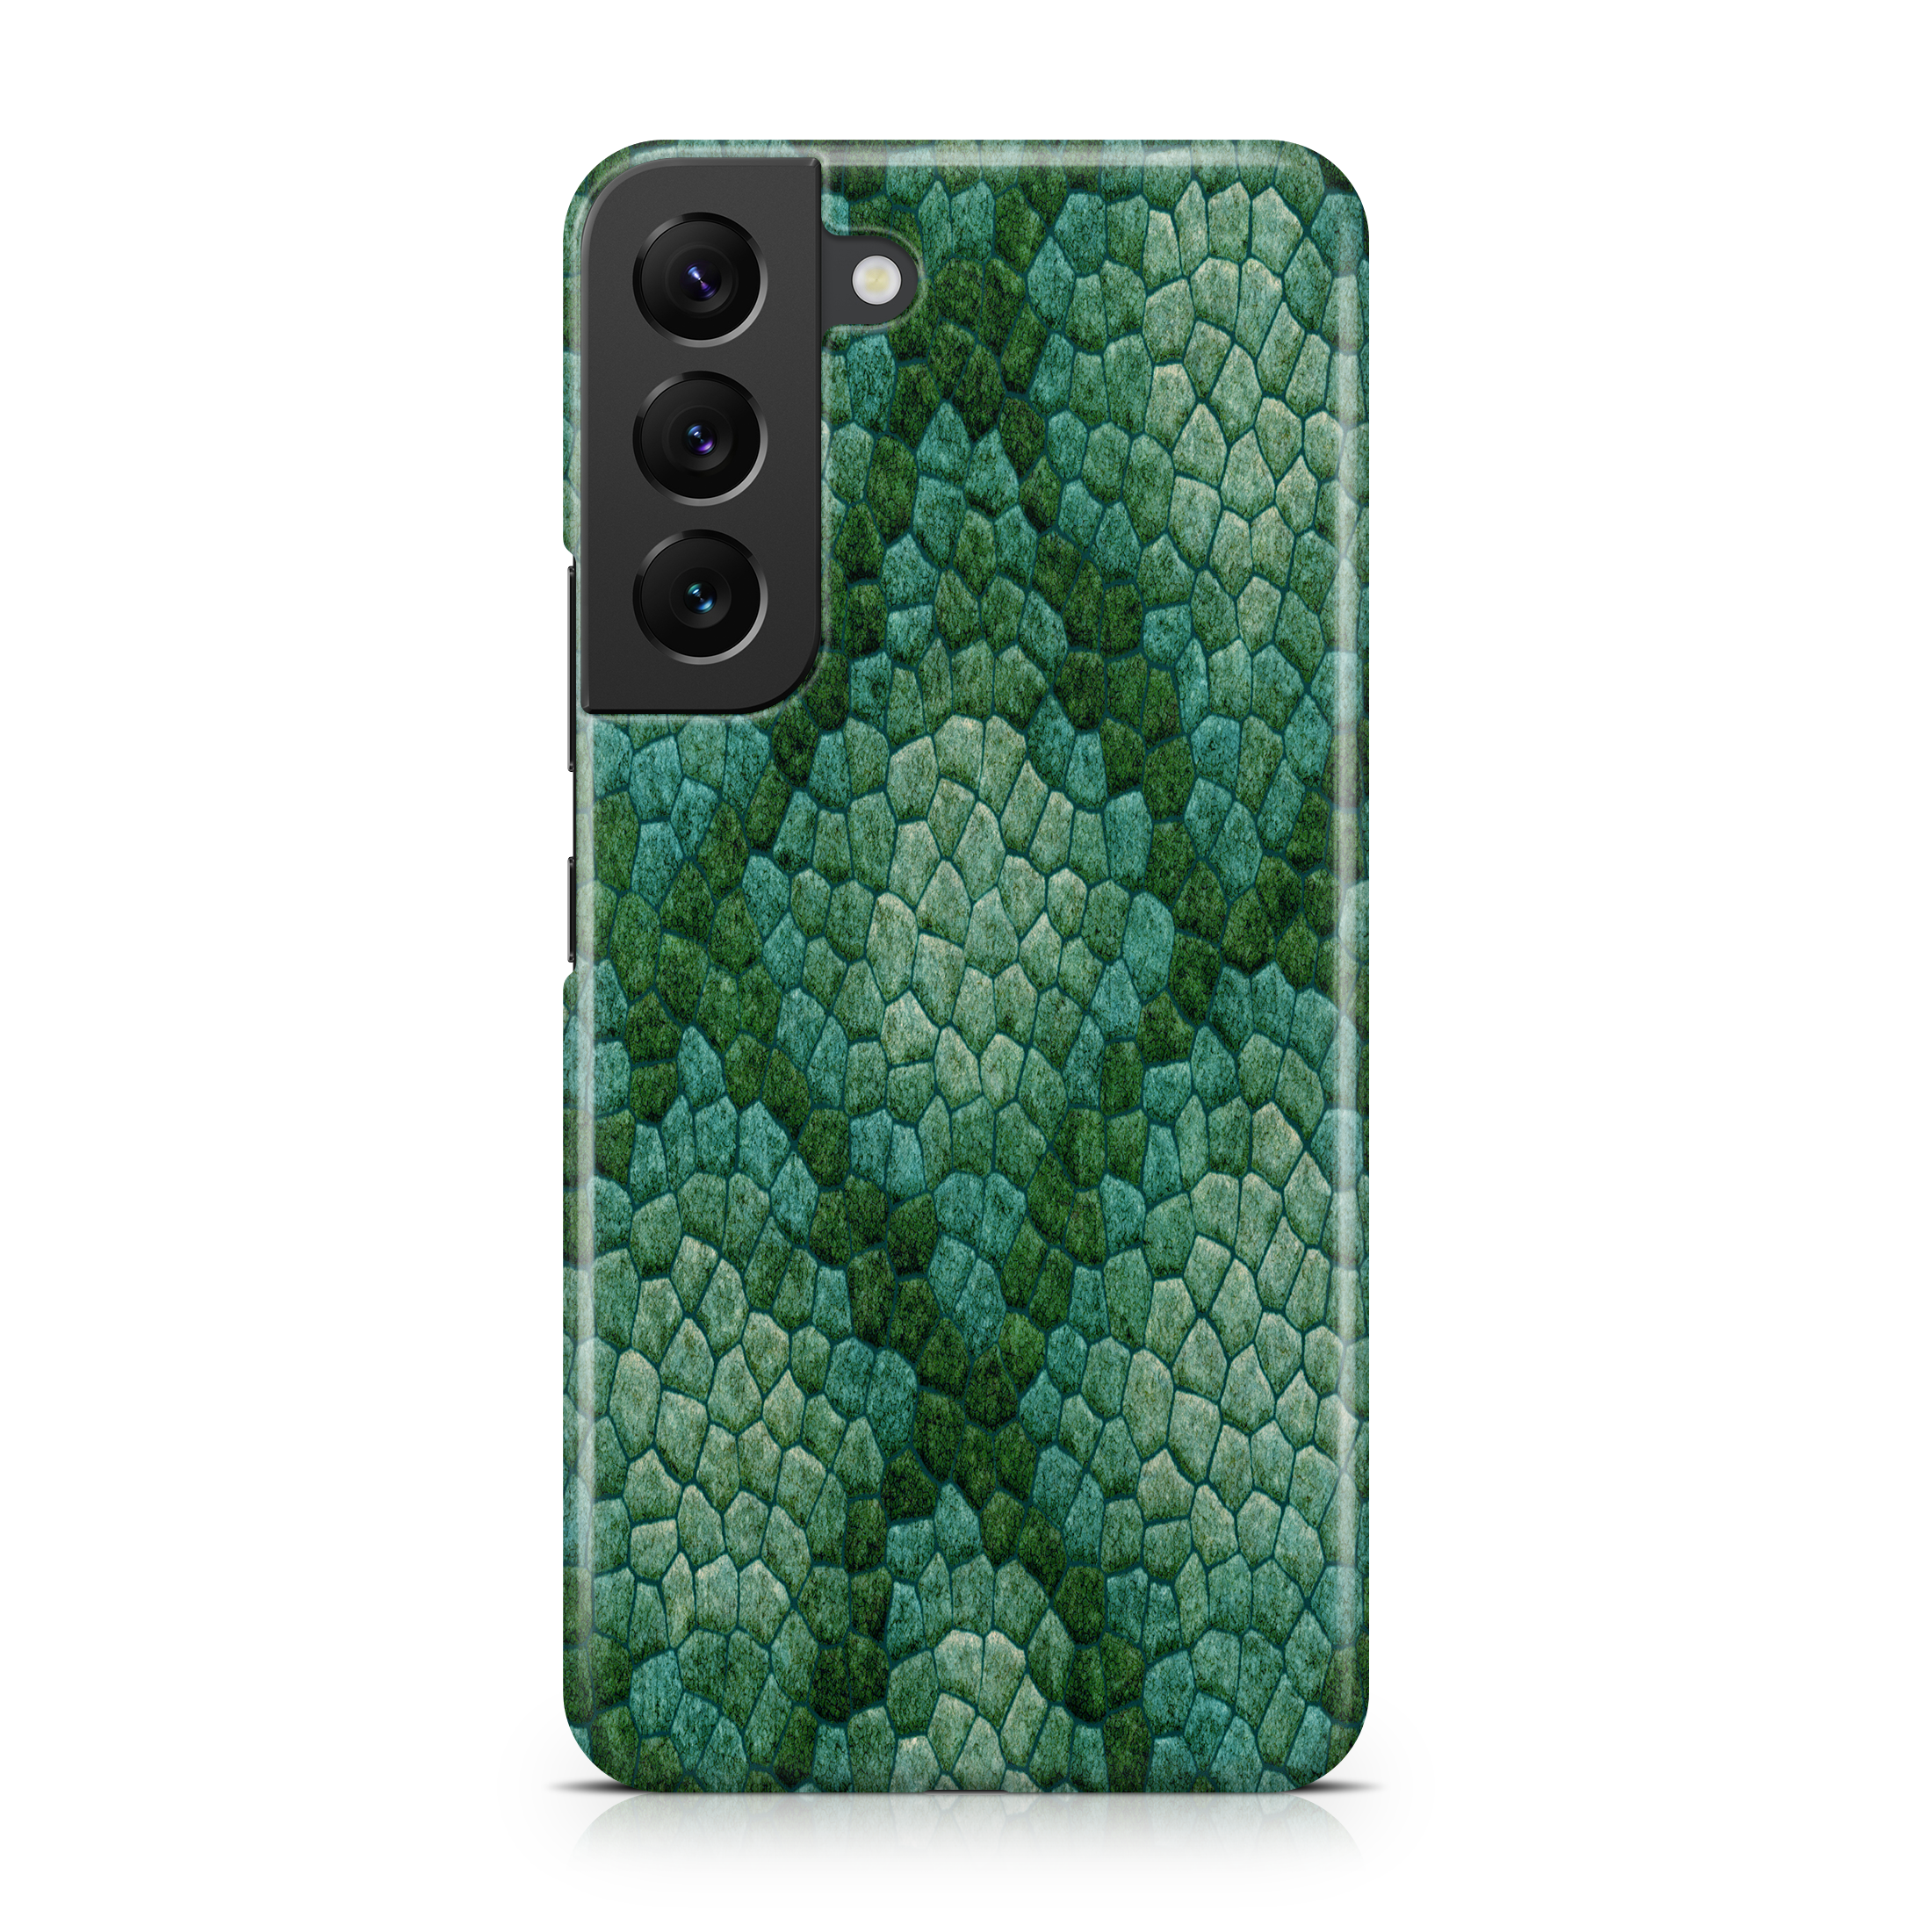 Snakeskin II - Samsung phone case designs by CaseSwagger